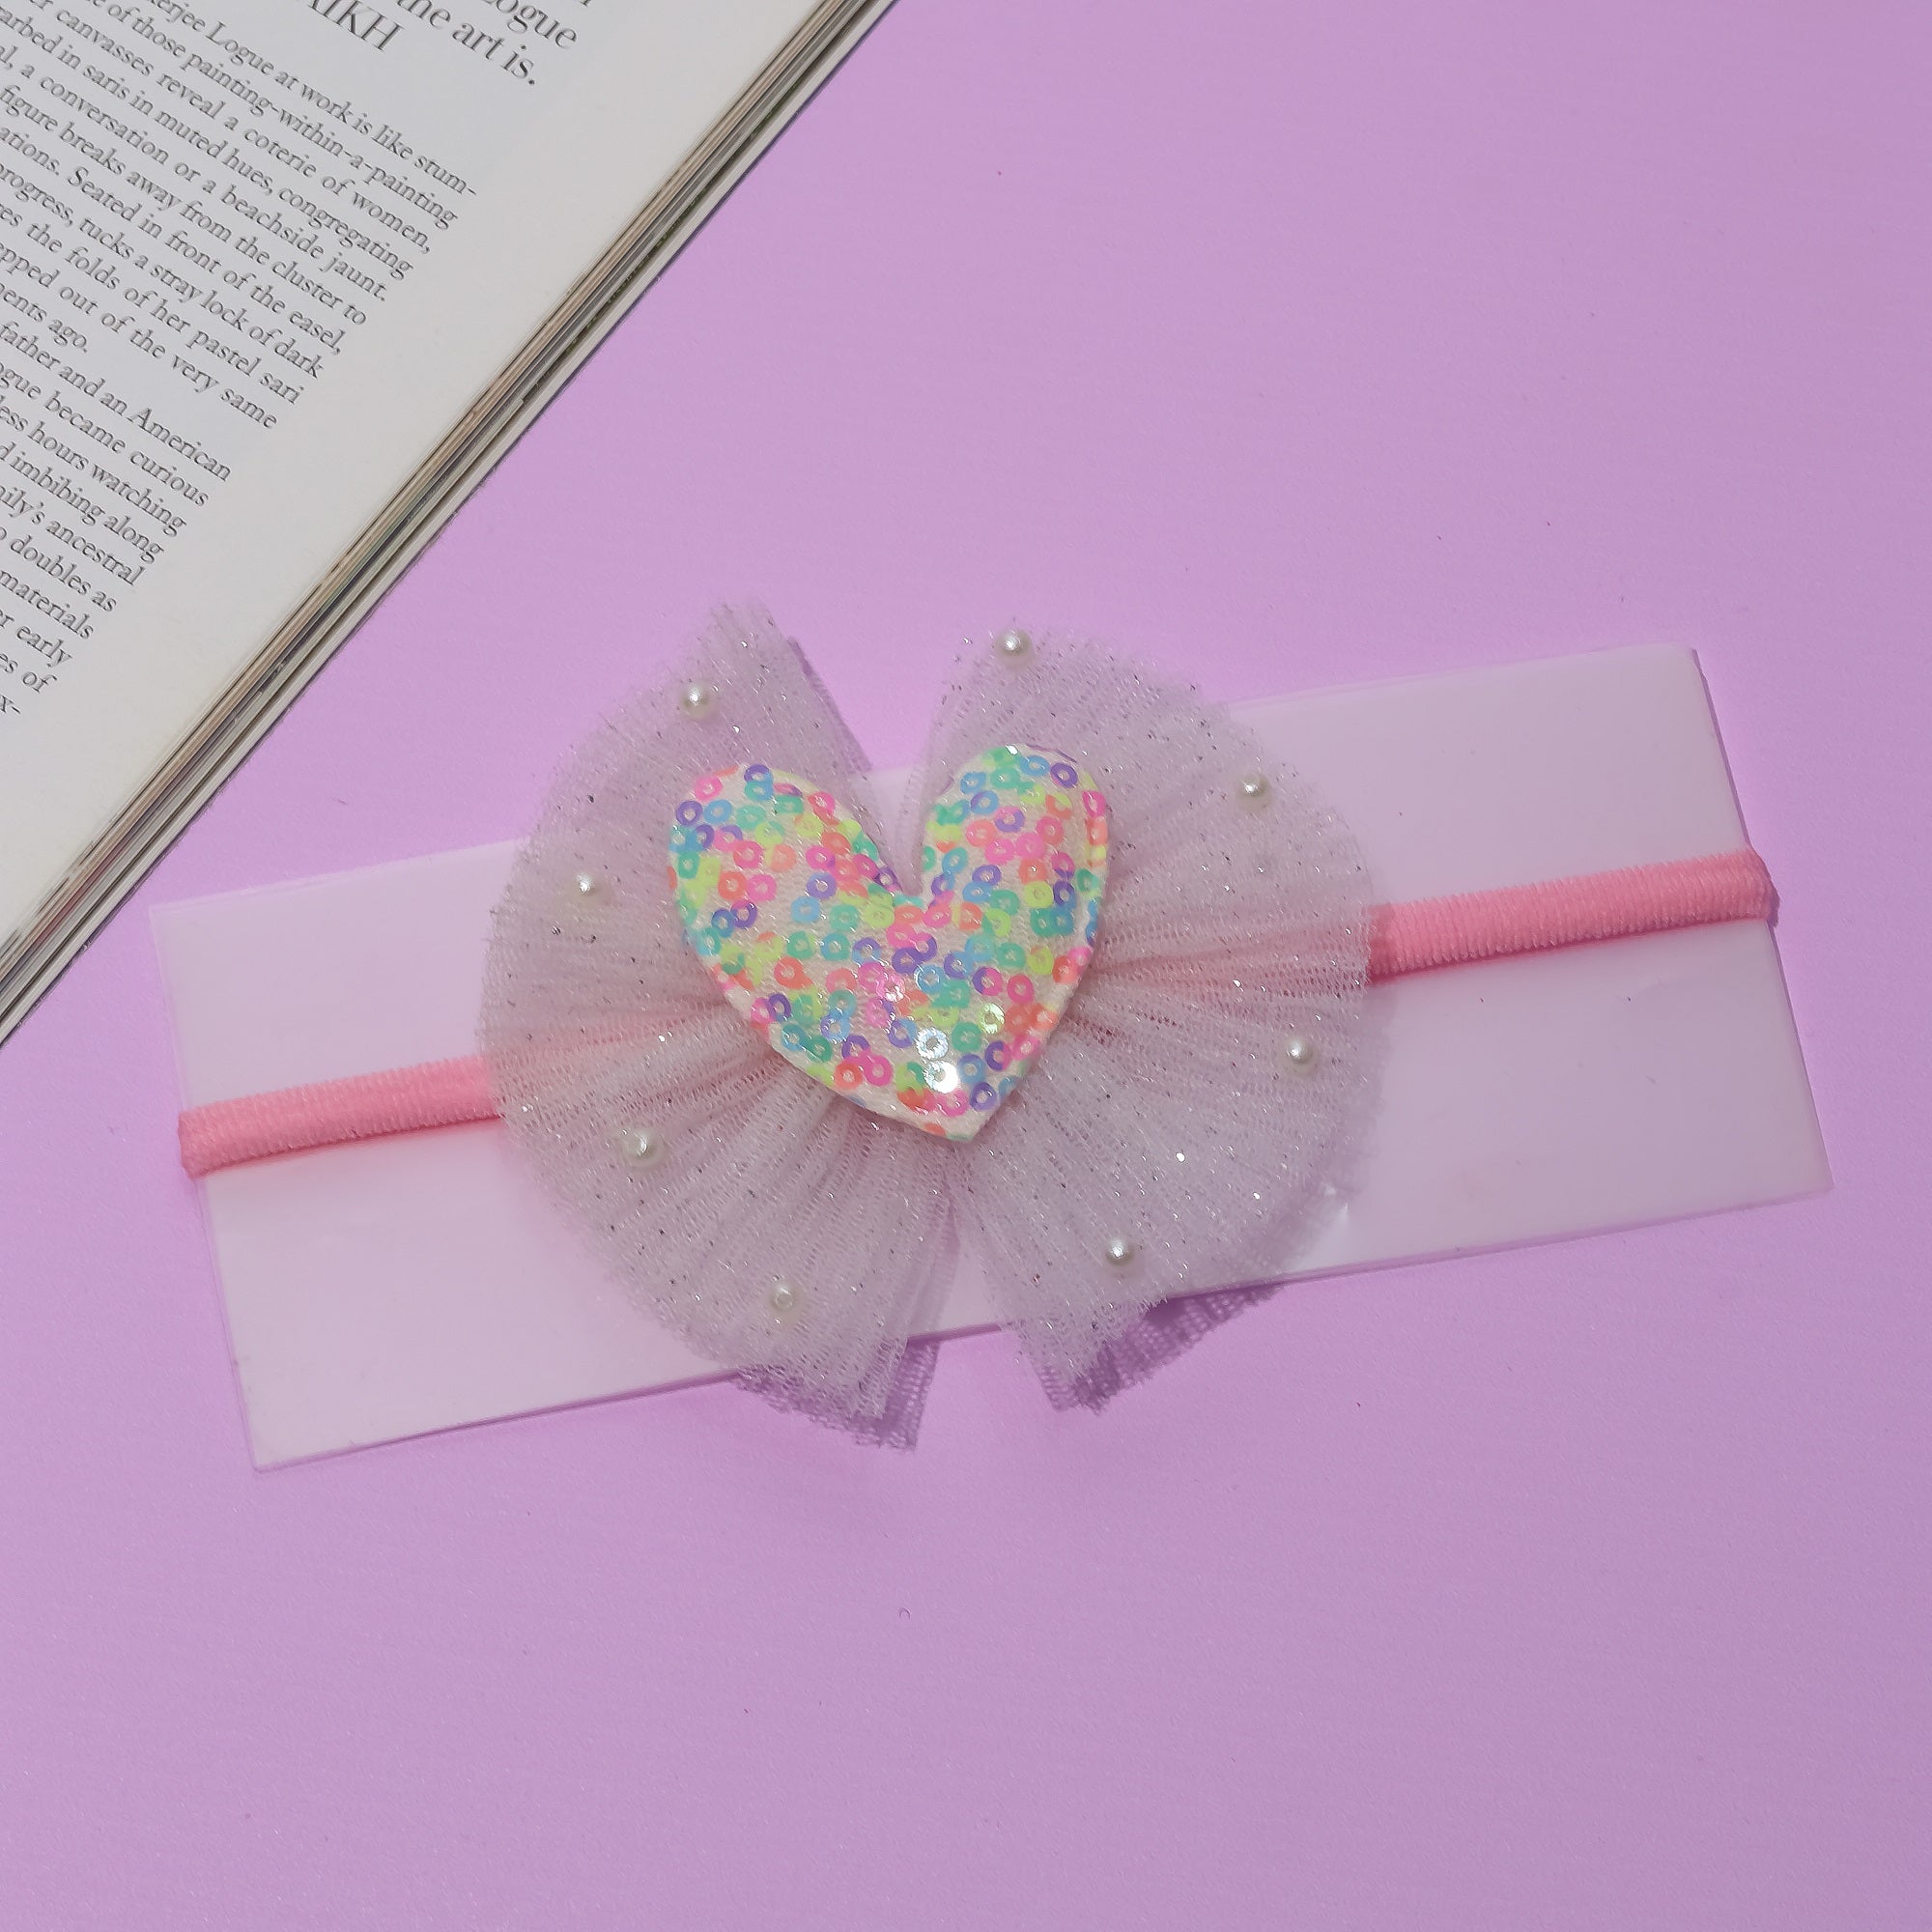 Sequined Heart Tulle Bow Headband- Multi Colored